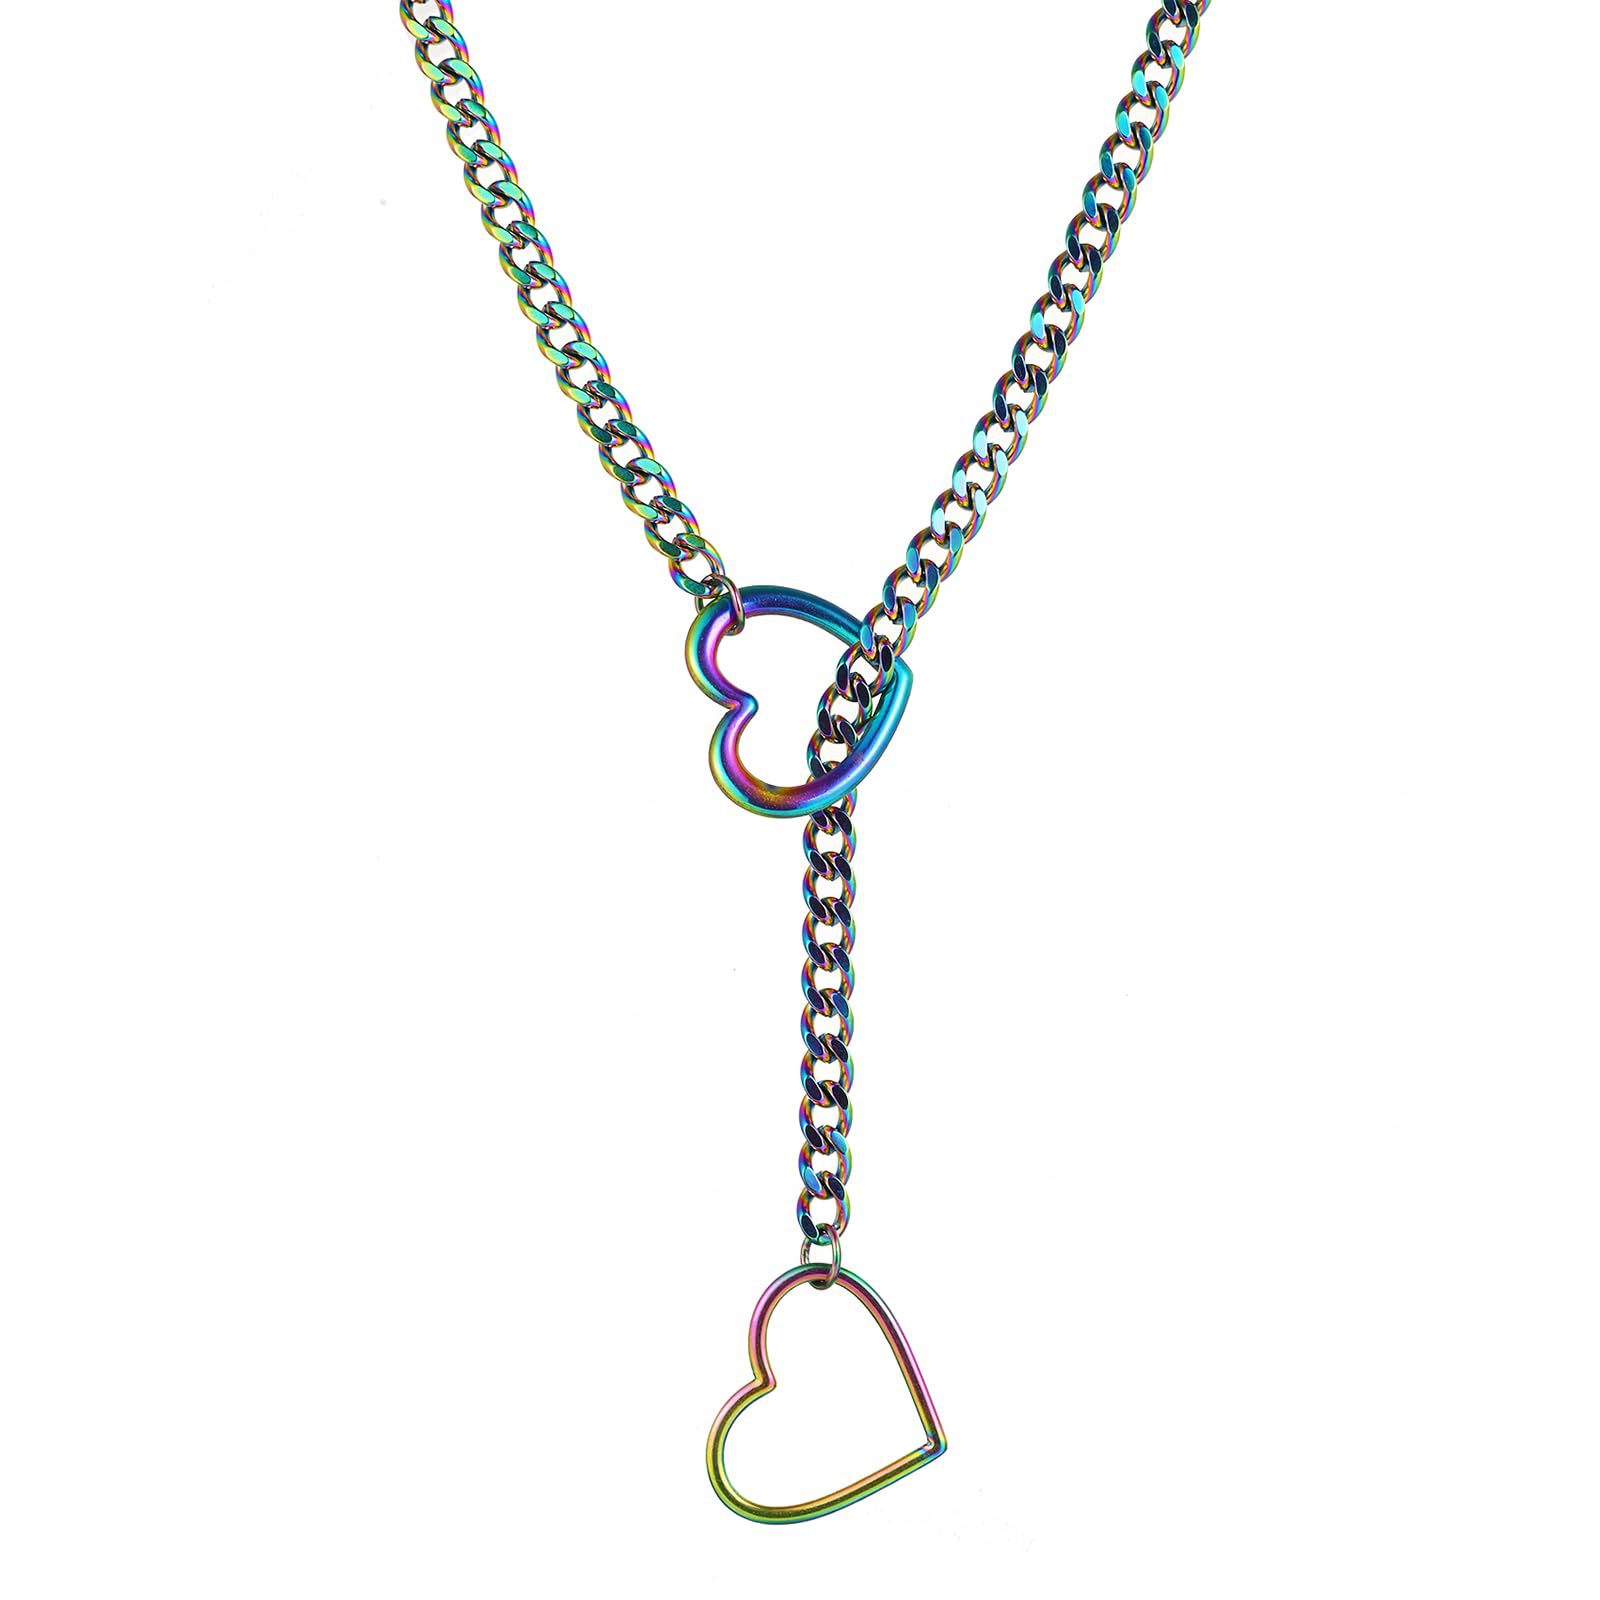 Colorful love necklace